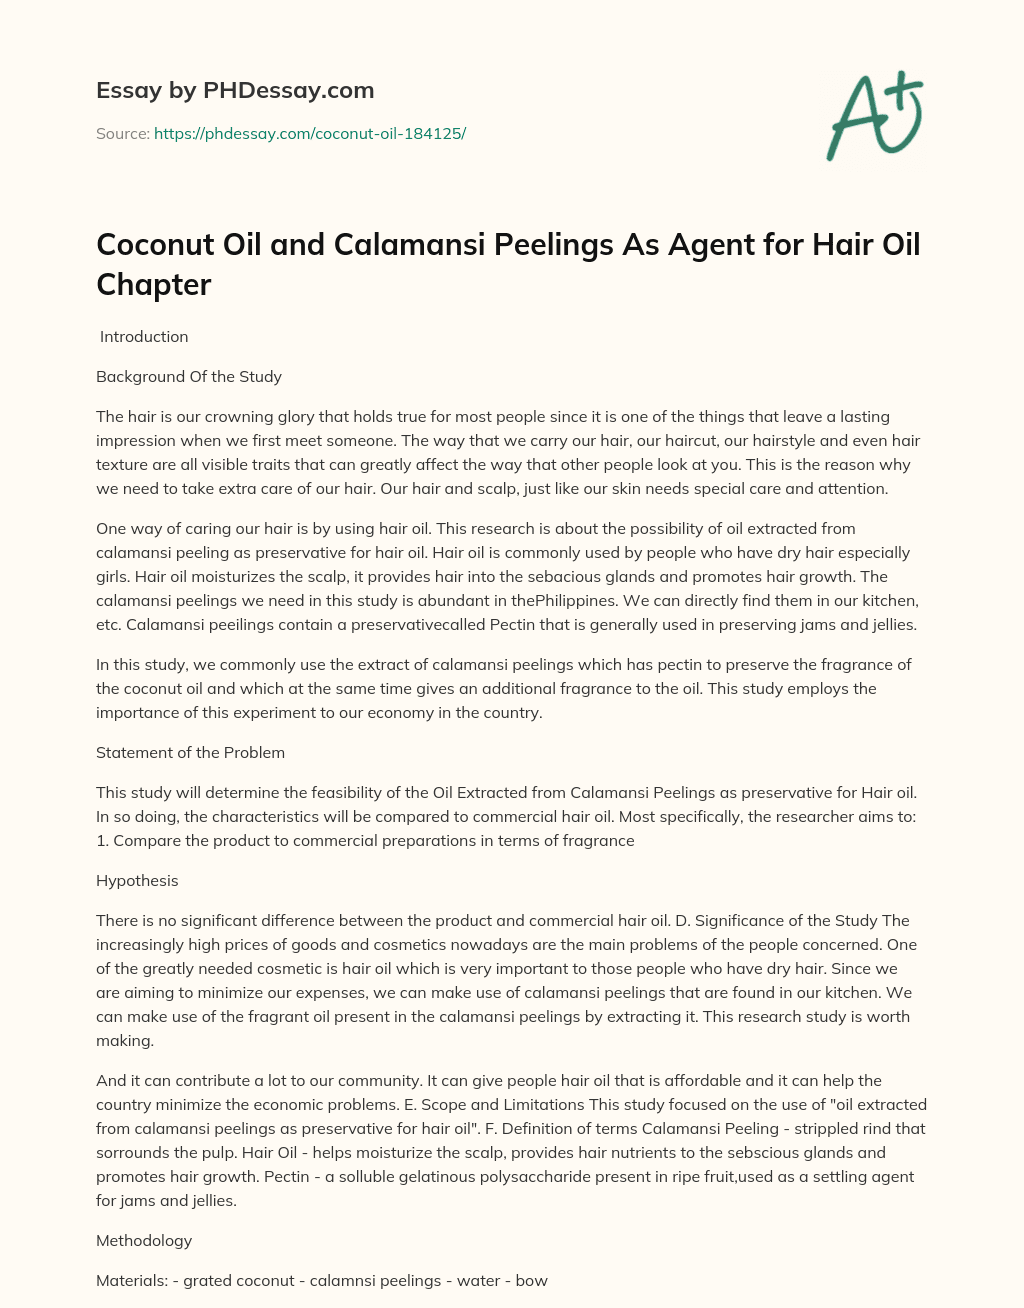 Coconut Oil and Calamansi Peelings As Agent for Hair Oil Chapter essay